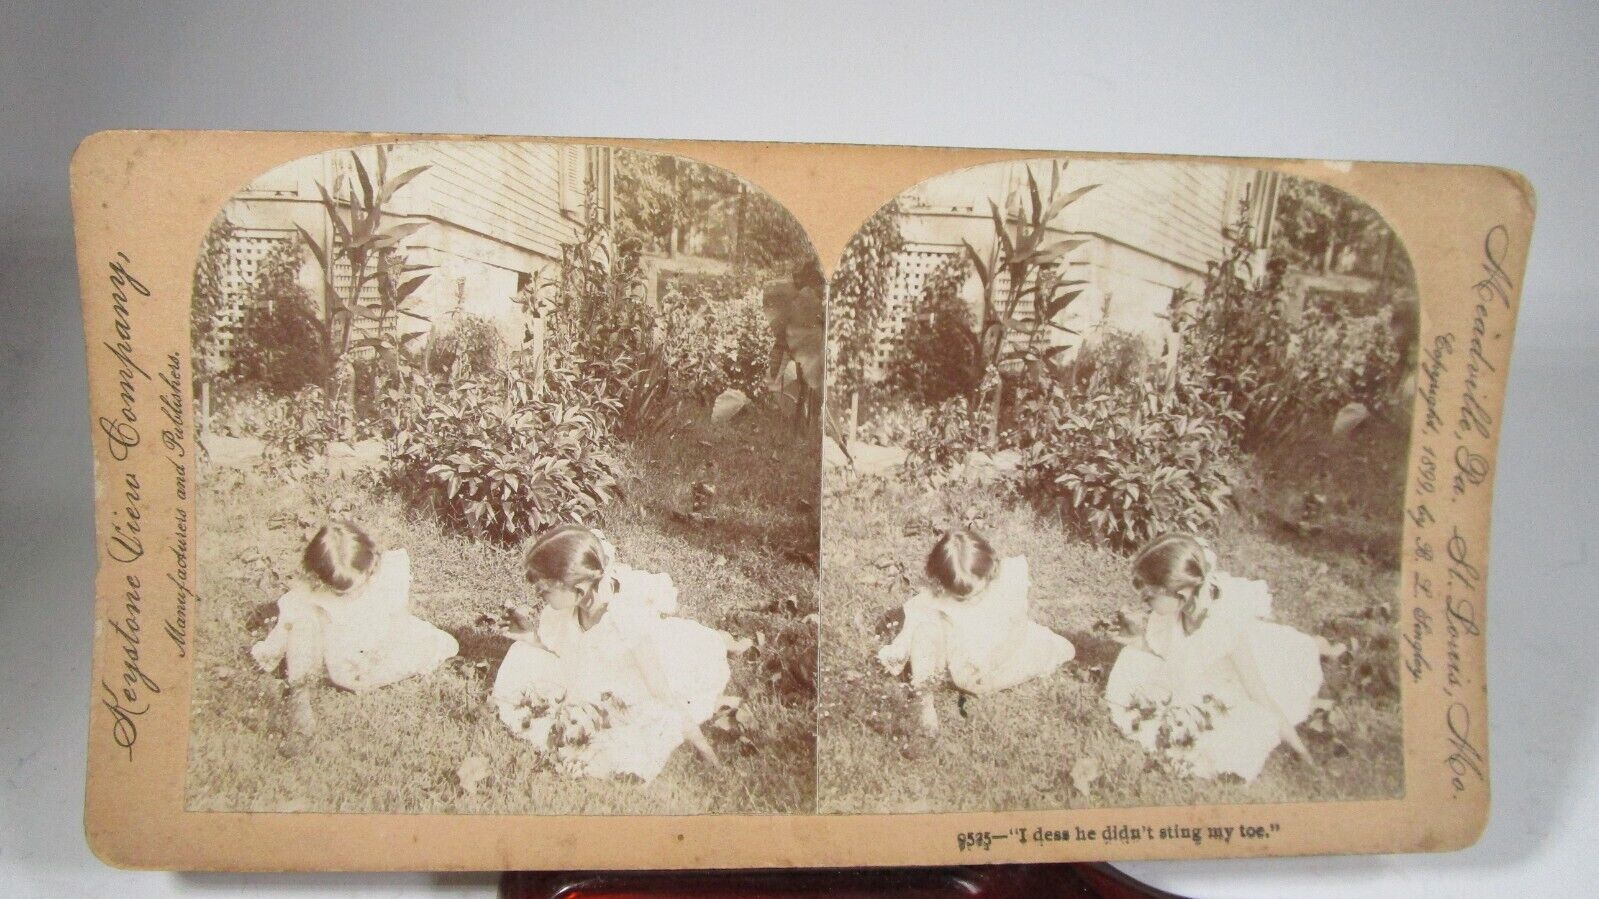 1899  Keystone  Co.  Stereo View Girls Playing DIDN\'T STING TOE   # 9235 Card